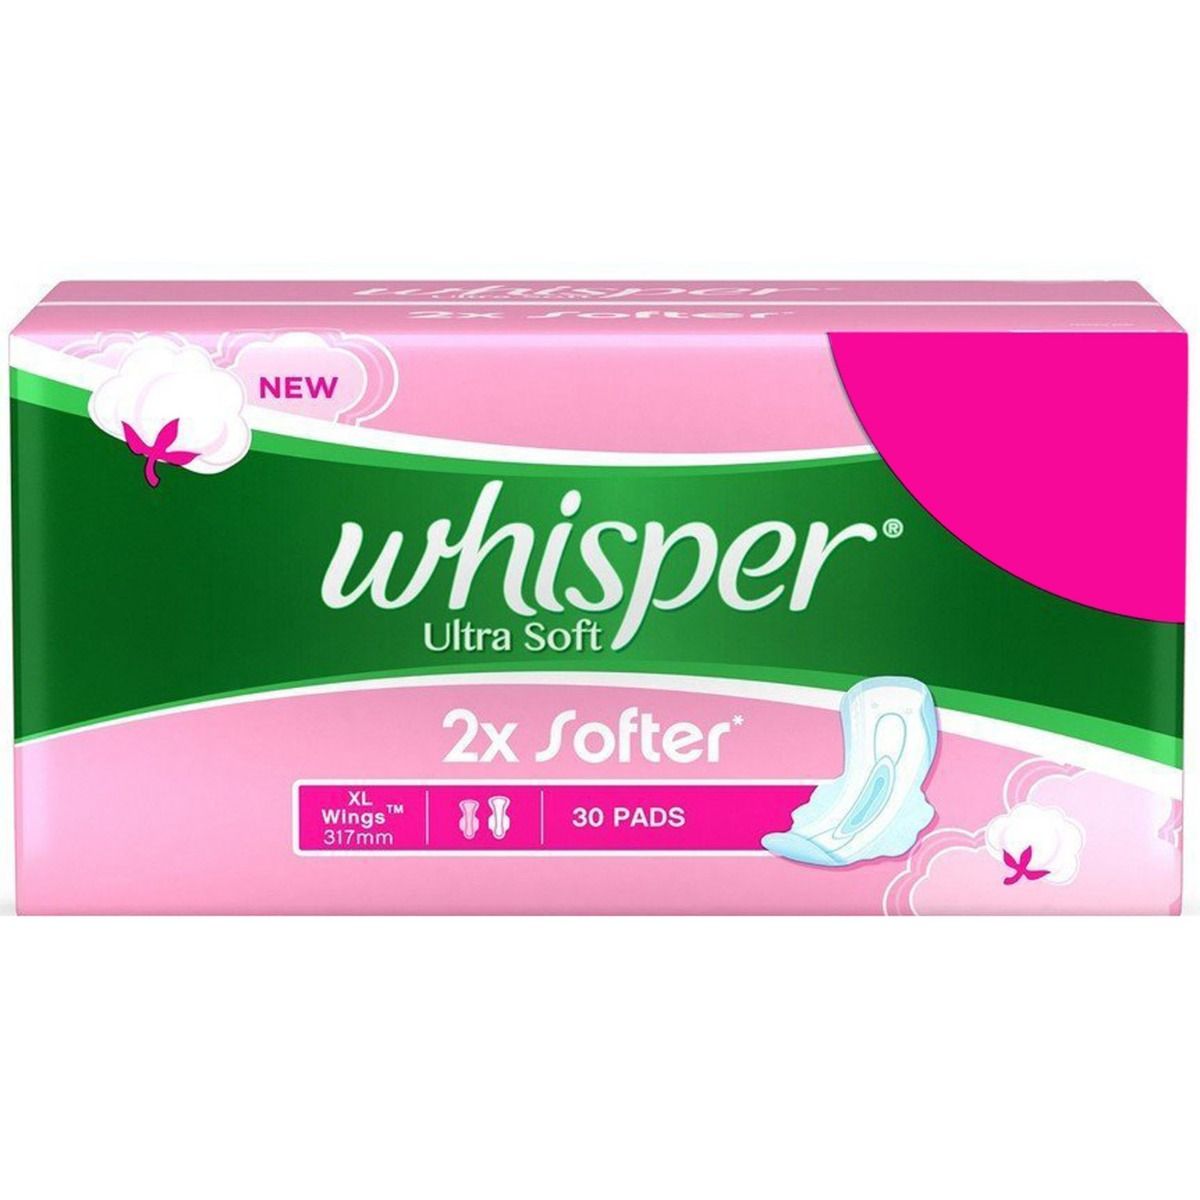 Buy Whisper Ultra Soft 2x Softer Wings Sanitary Pads XL, 30 Count Online